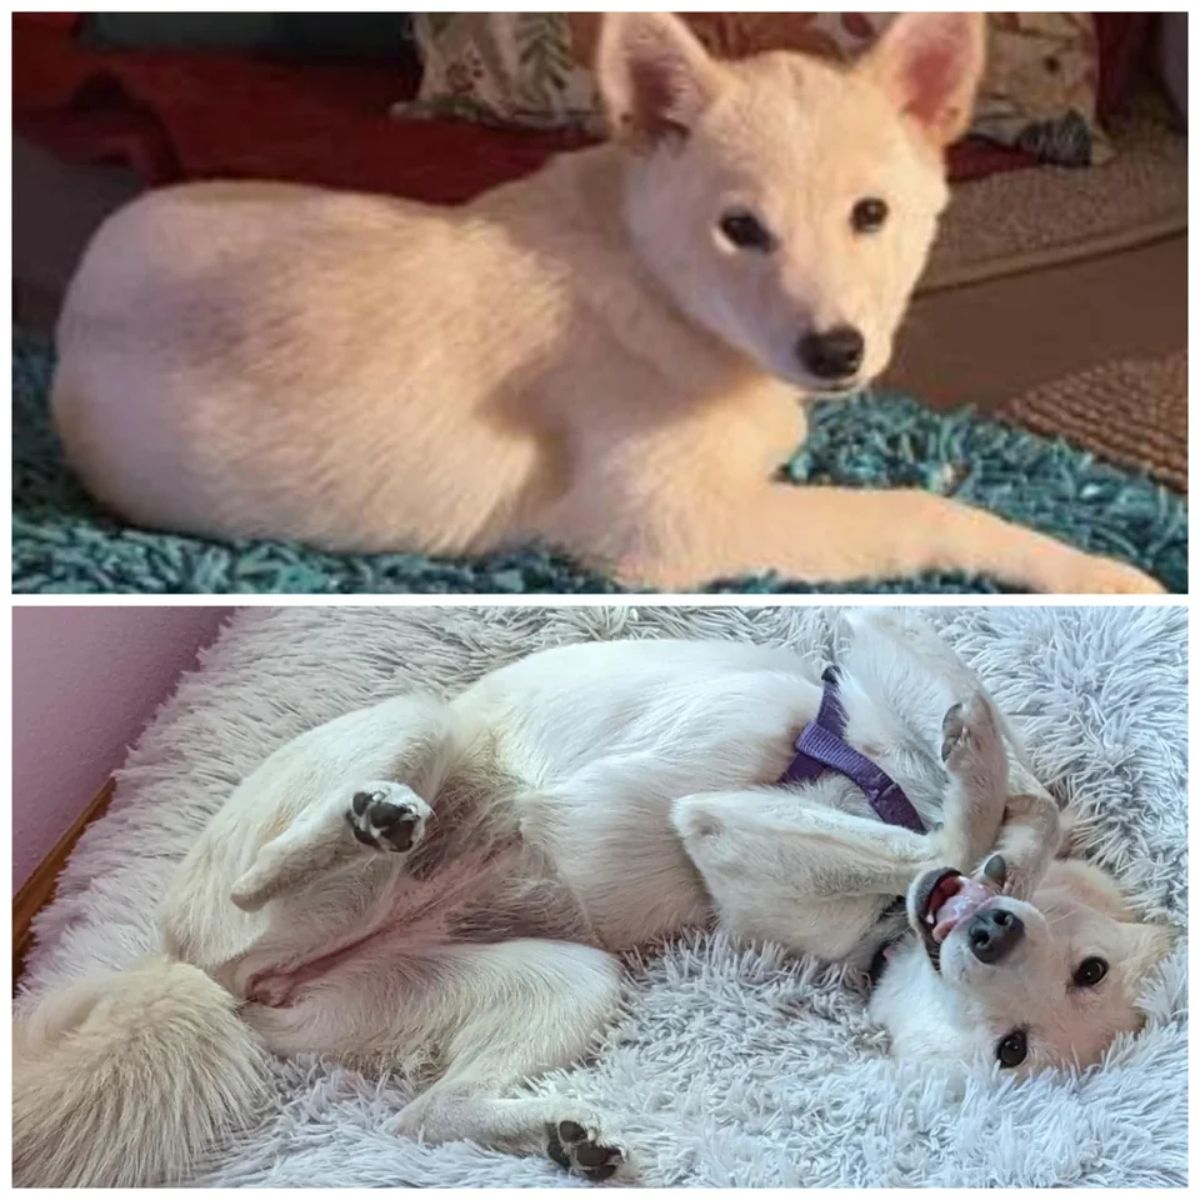 2 photos of a white dog laying down